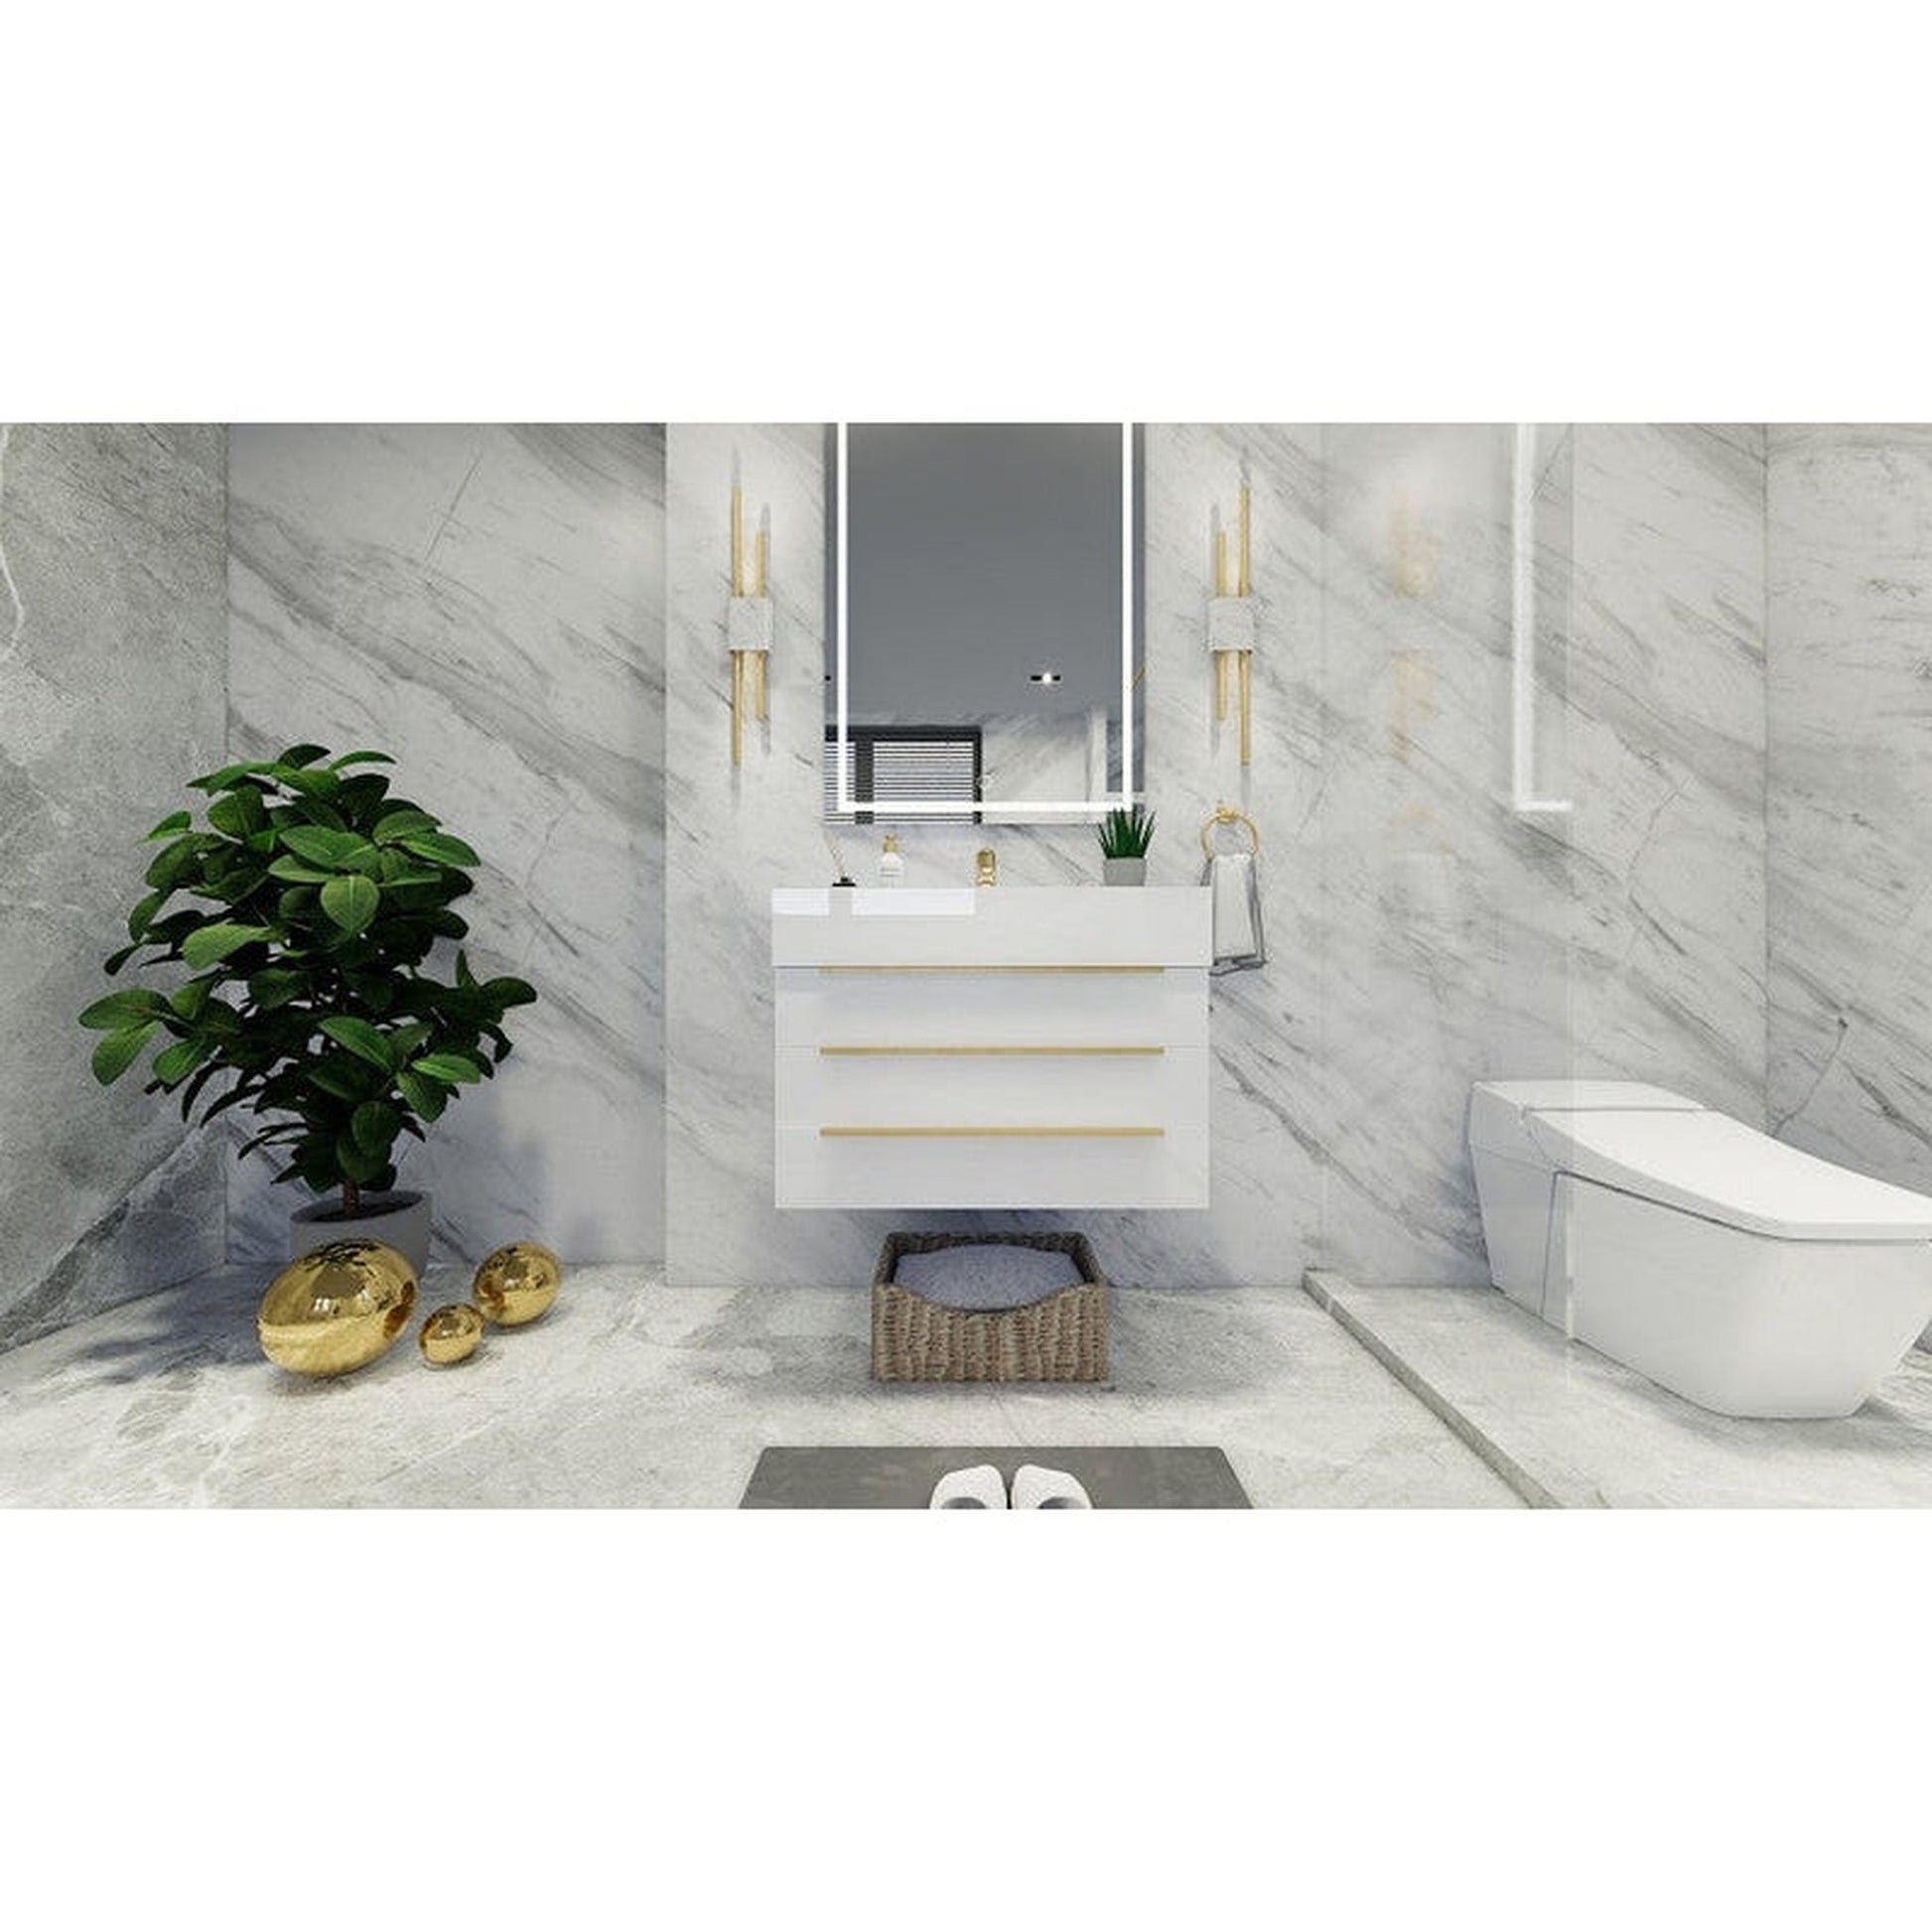 Moreno Bath Bethany 30" High Gloss White Wall-Mounted Vanity With Single Reinforced White Acrylic Sink